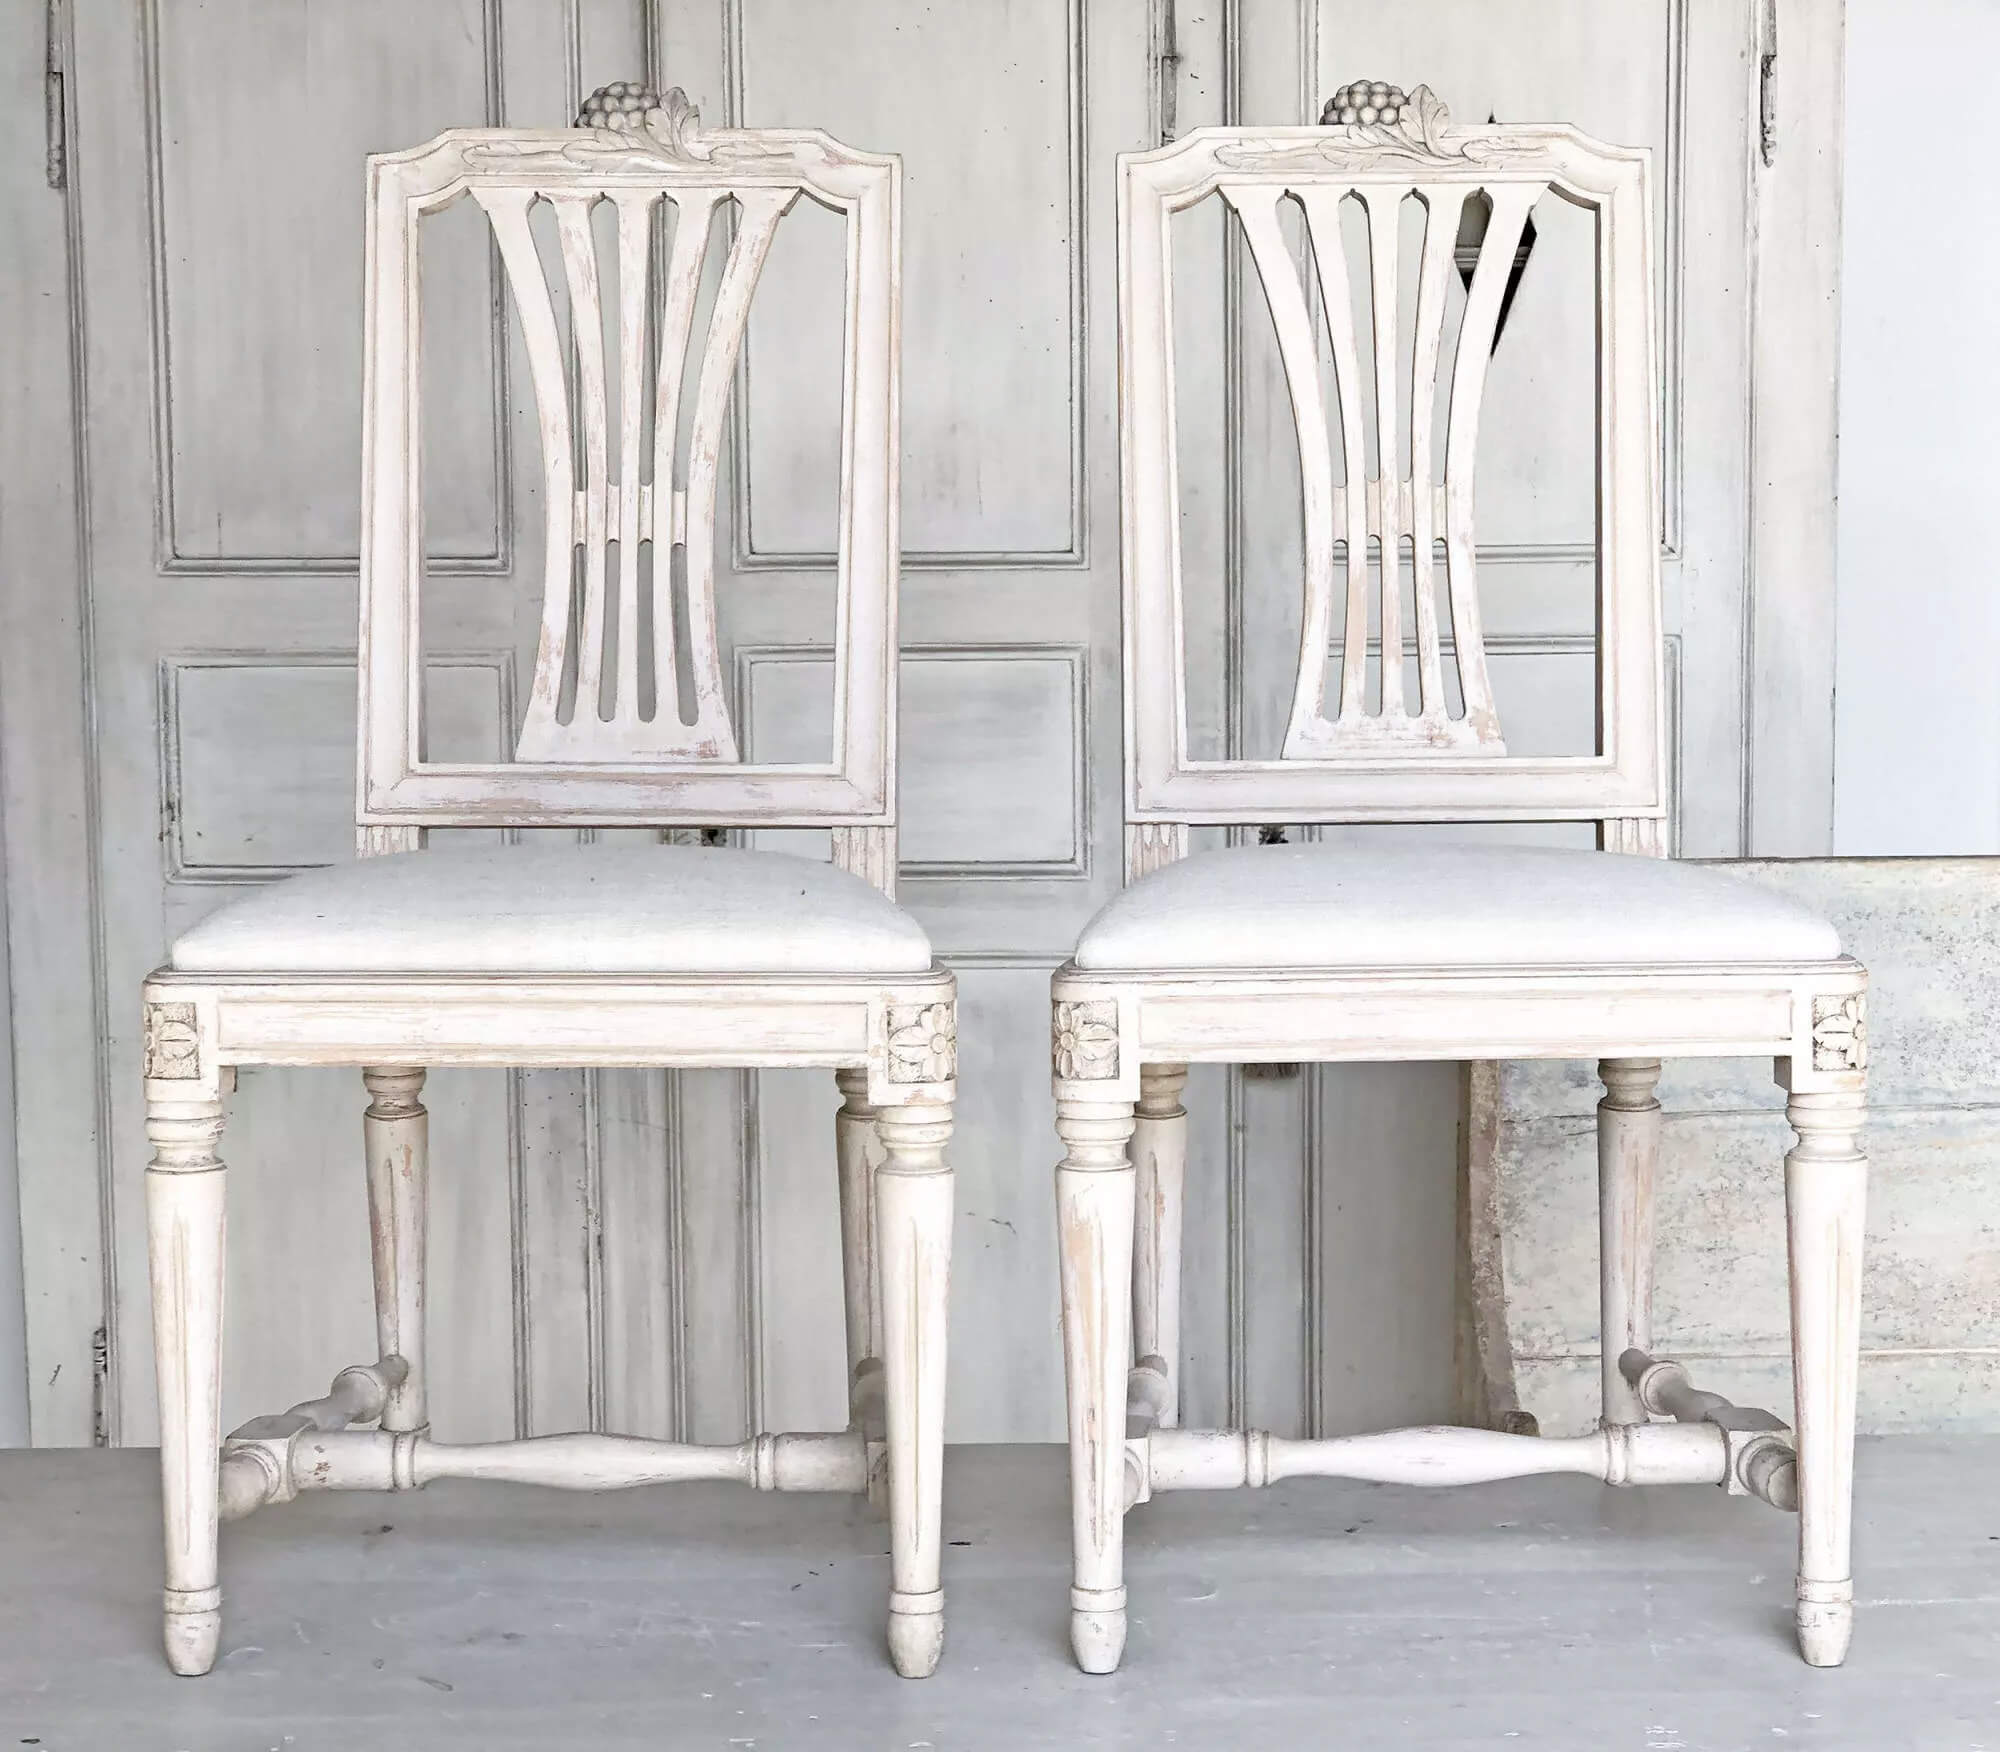 Antique chairs from Appley Hoare Antiques